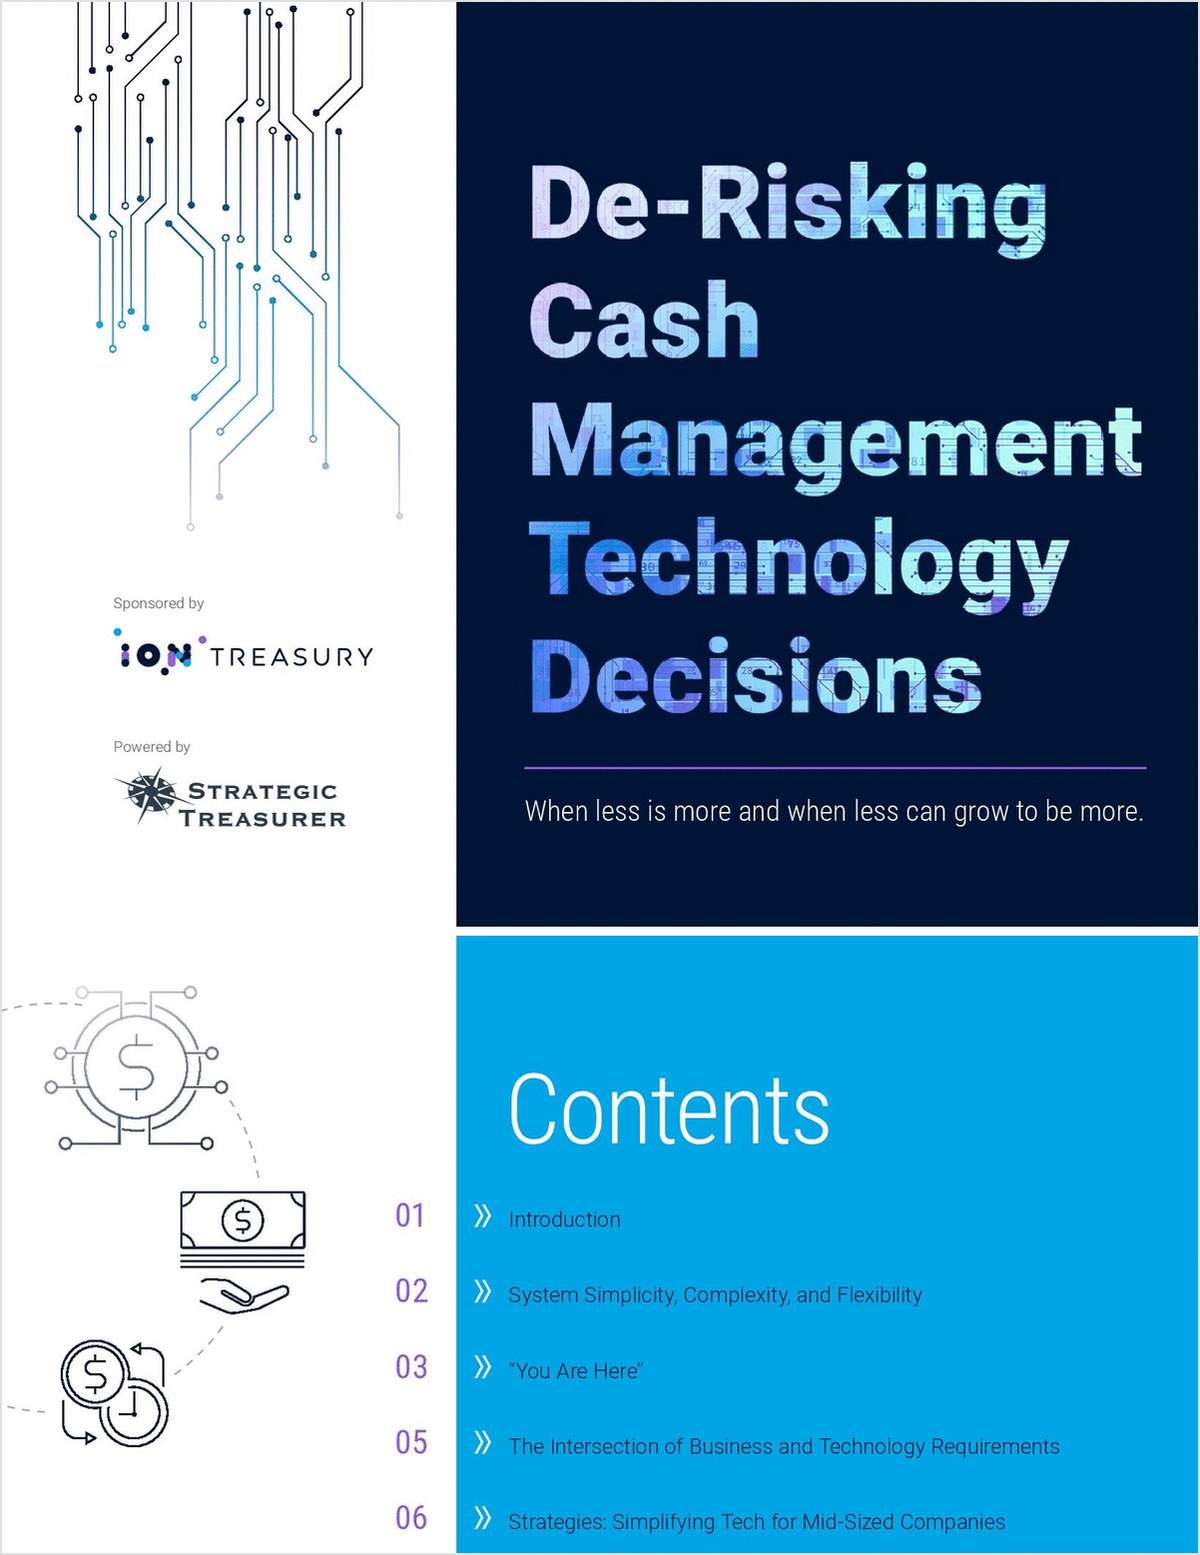 De-Risking Cash Management Technology Decisions: When Less Is More and When Less Can Grow To Be More link